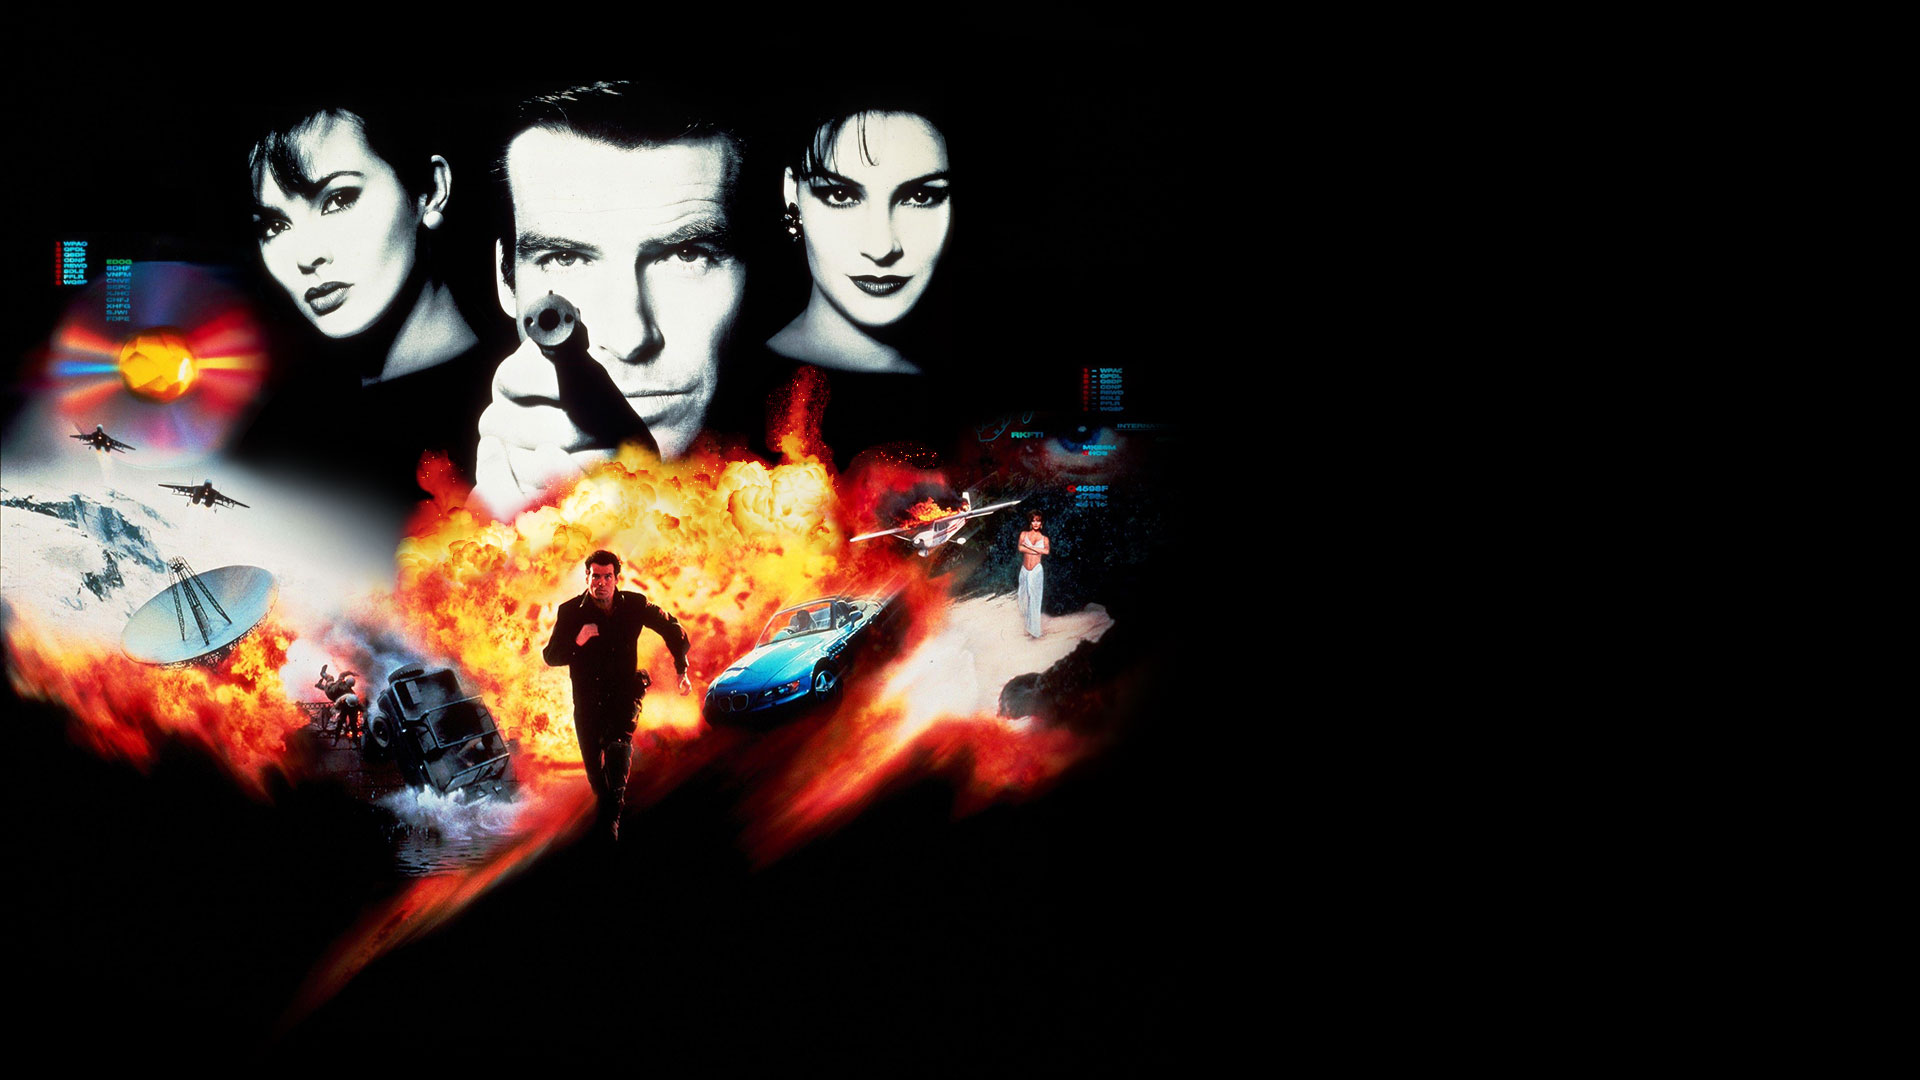 A collage of scenes and characters from Goldeneye 007.